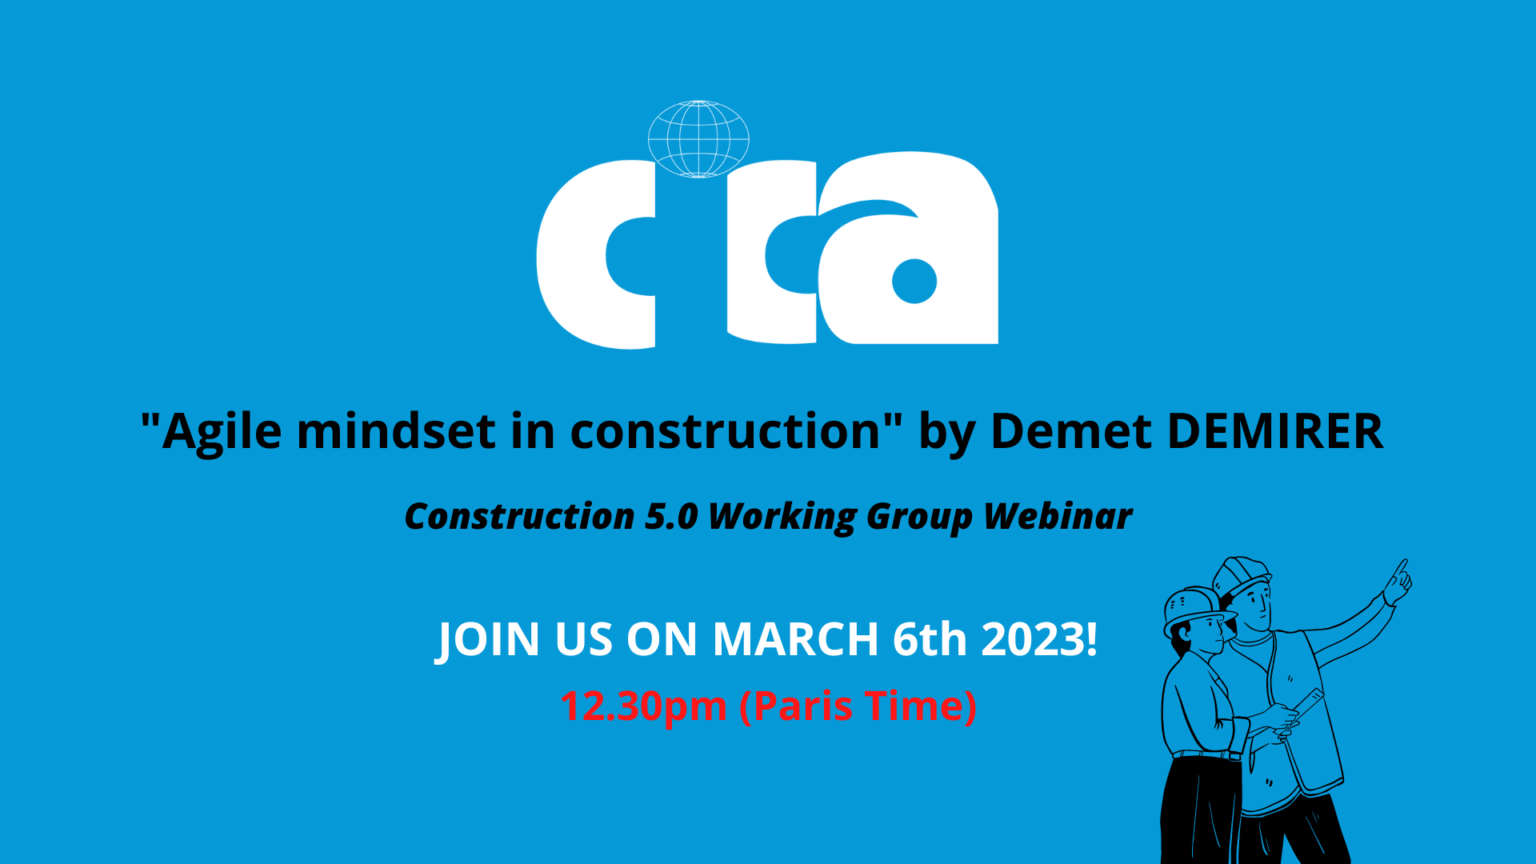 Cica's Construction 5.0 Working Group Meeting